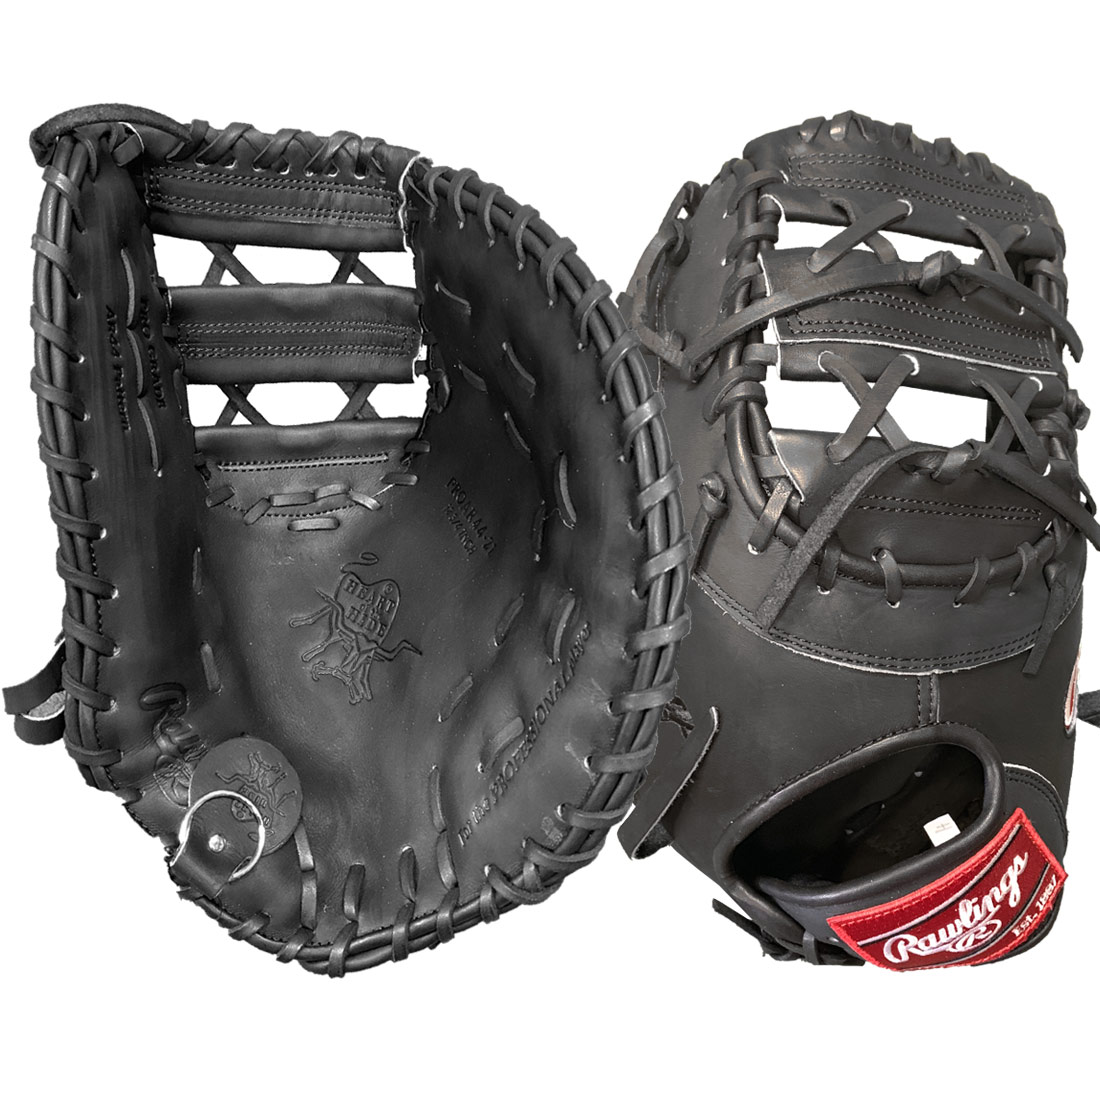 Rawlings Heart of the Hide Anthony Rizzo Baseball First Base Mitt 12.75\" PROAR44-21